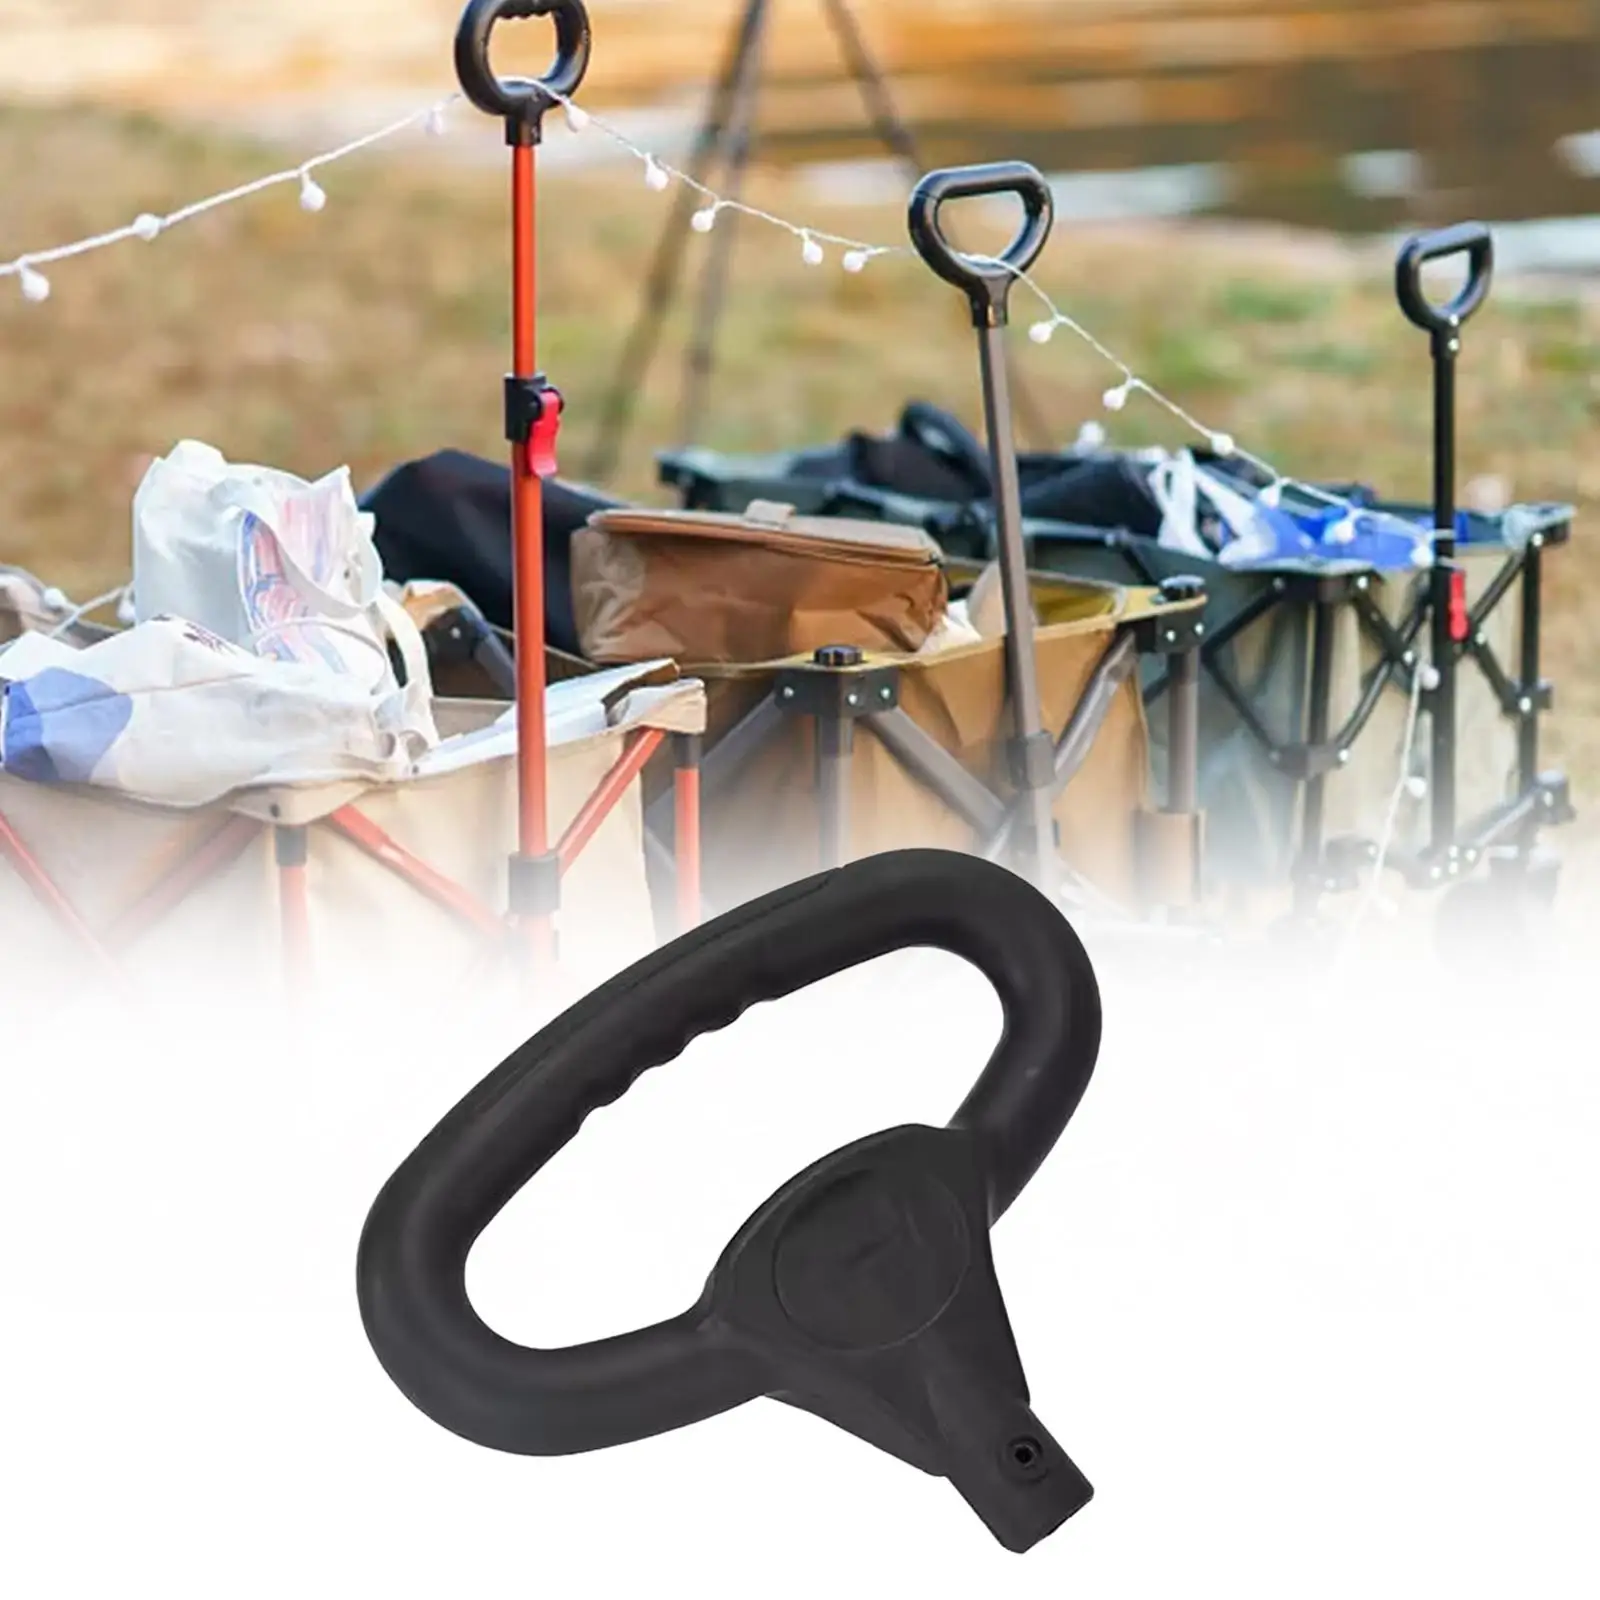 Wagon Cart Push Handle Replacement Accessories Black Portable Comfortable Gripping for Camping Shopping Cart Outdoor Gardening